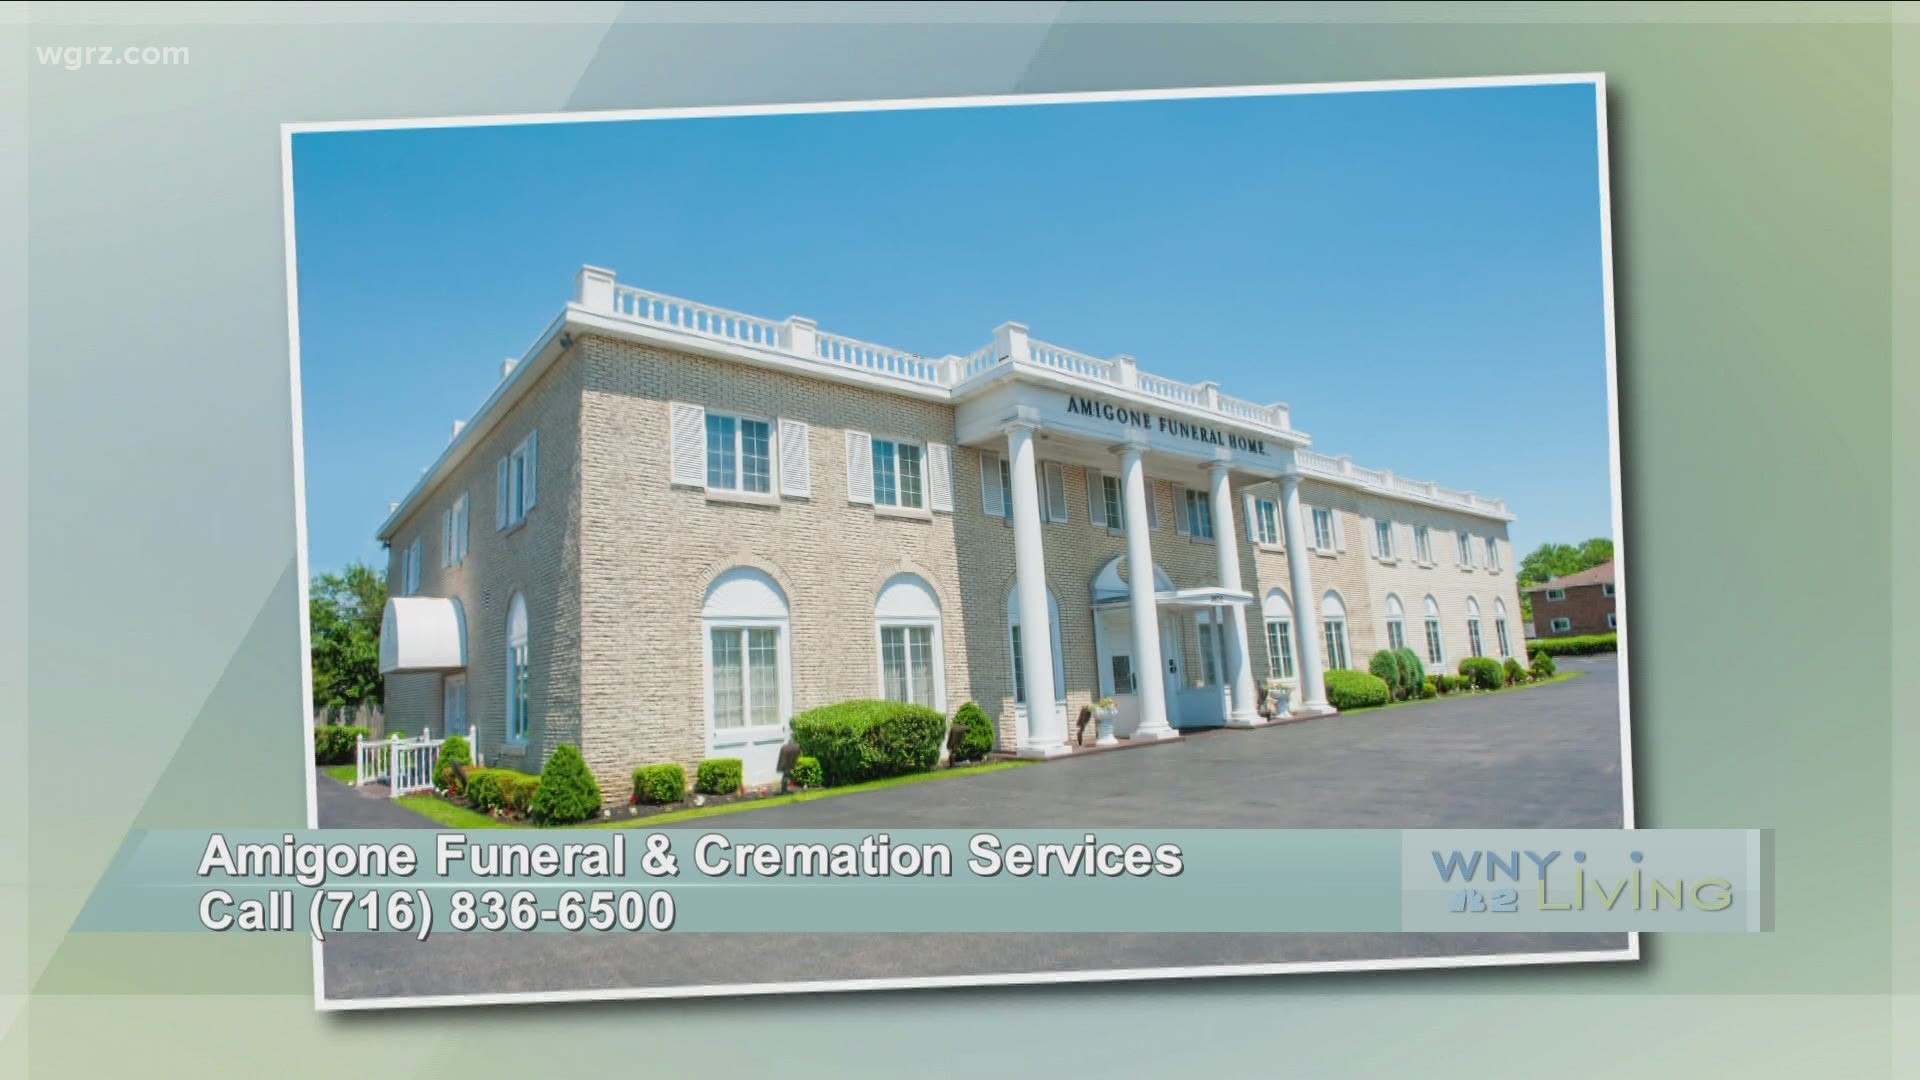 WNY Living - April 24 - Amigone Funeral & Cremation Services (THIS VIDEO IS SPONSORED BY AMIGONE FUNERAL & CREMATION SERVICES)